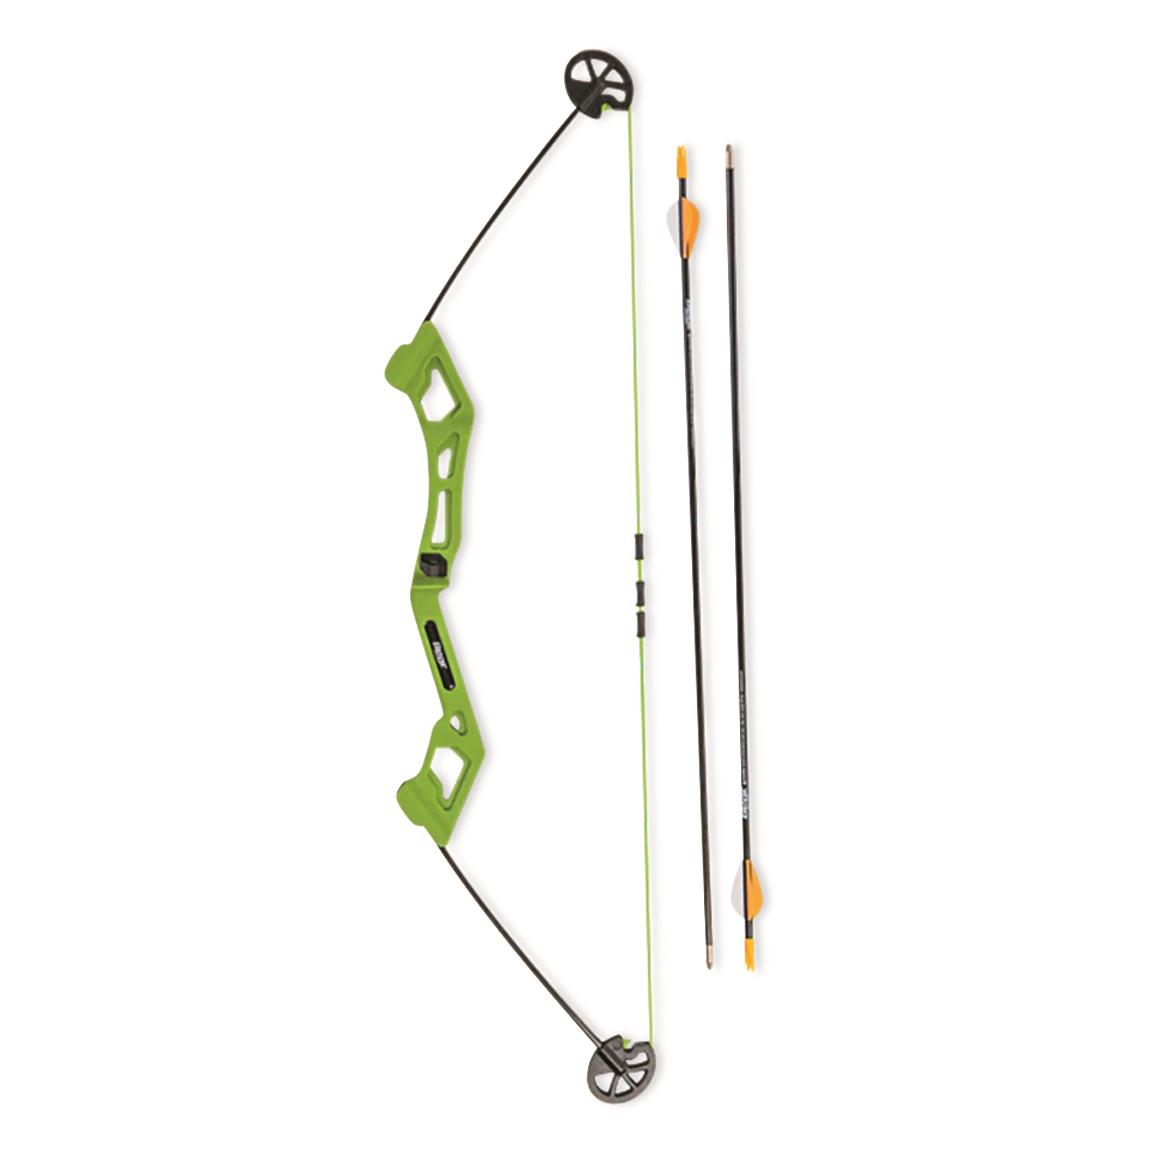 Bear Archery Valiant Youth Compound Bow Set, 16.5-lb. Draw Weight, Right Hand, Flo Green